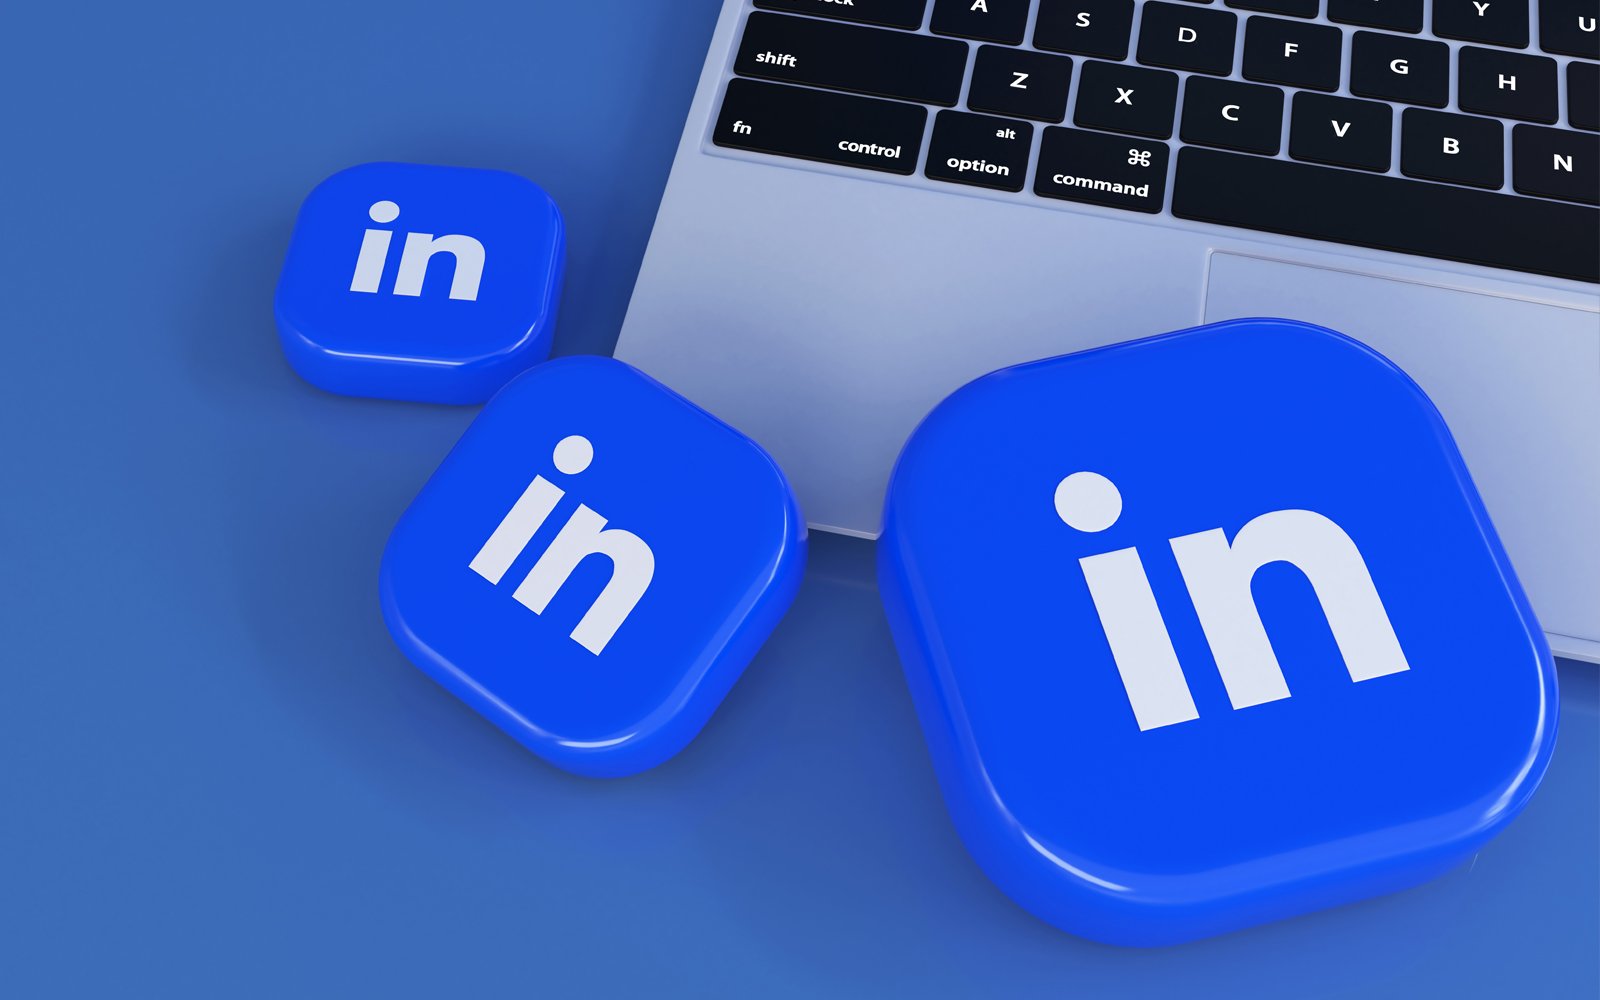 5 Incredibly Useful LinkedIn Profile Tips to Create a Profile Recruiters Actually Read